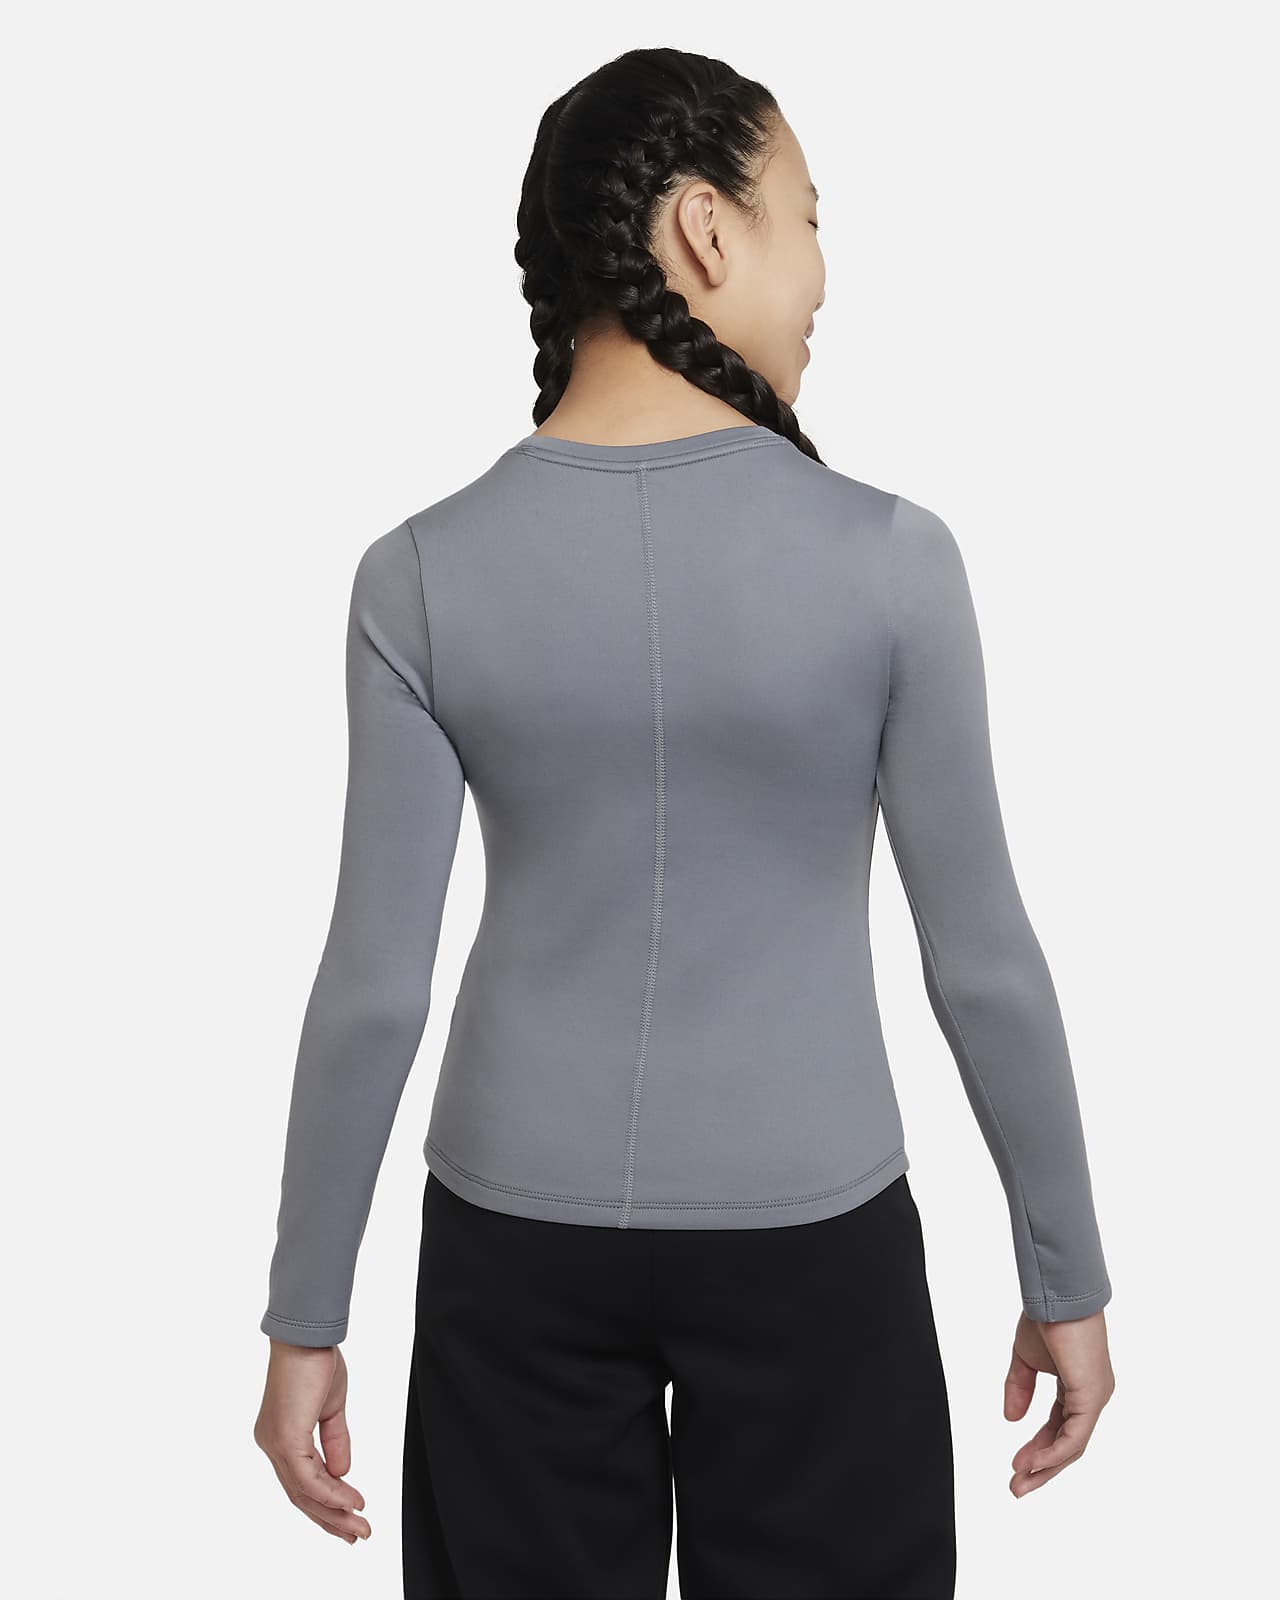 Nike One Big Kids' Therma-FIT Long-Sleeve Training Top.